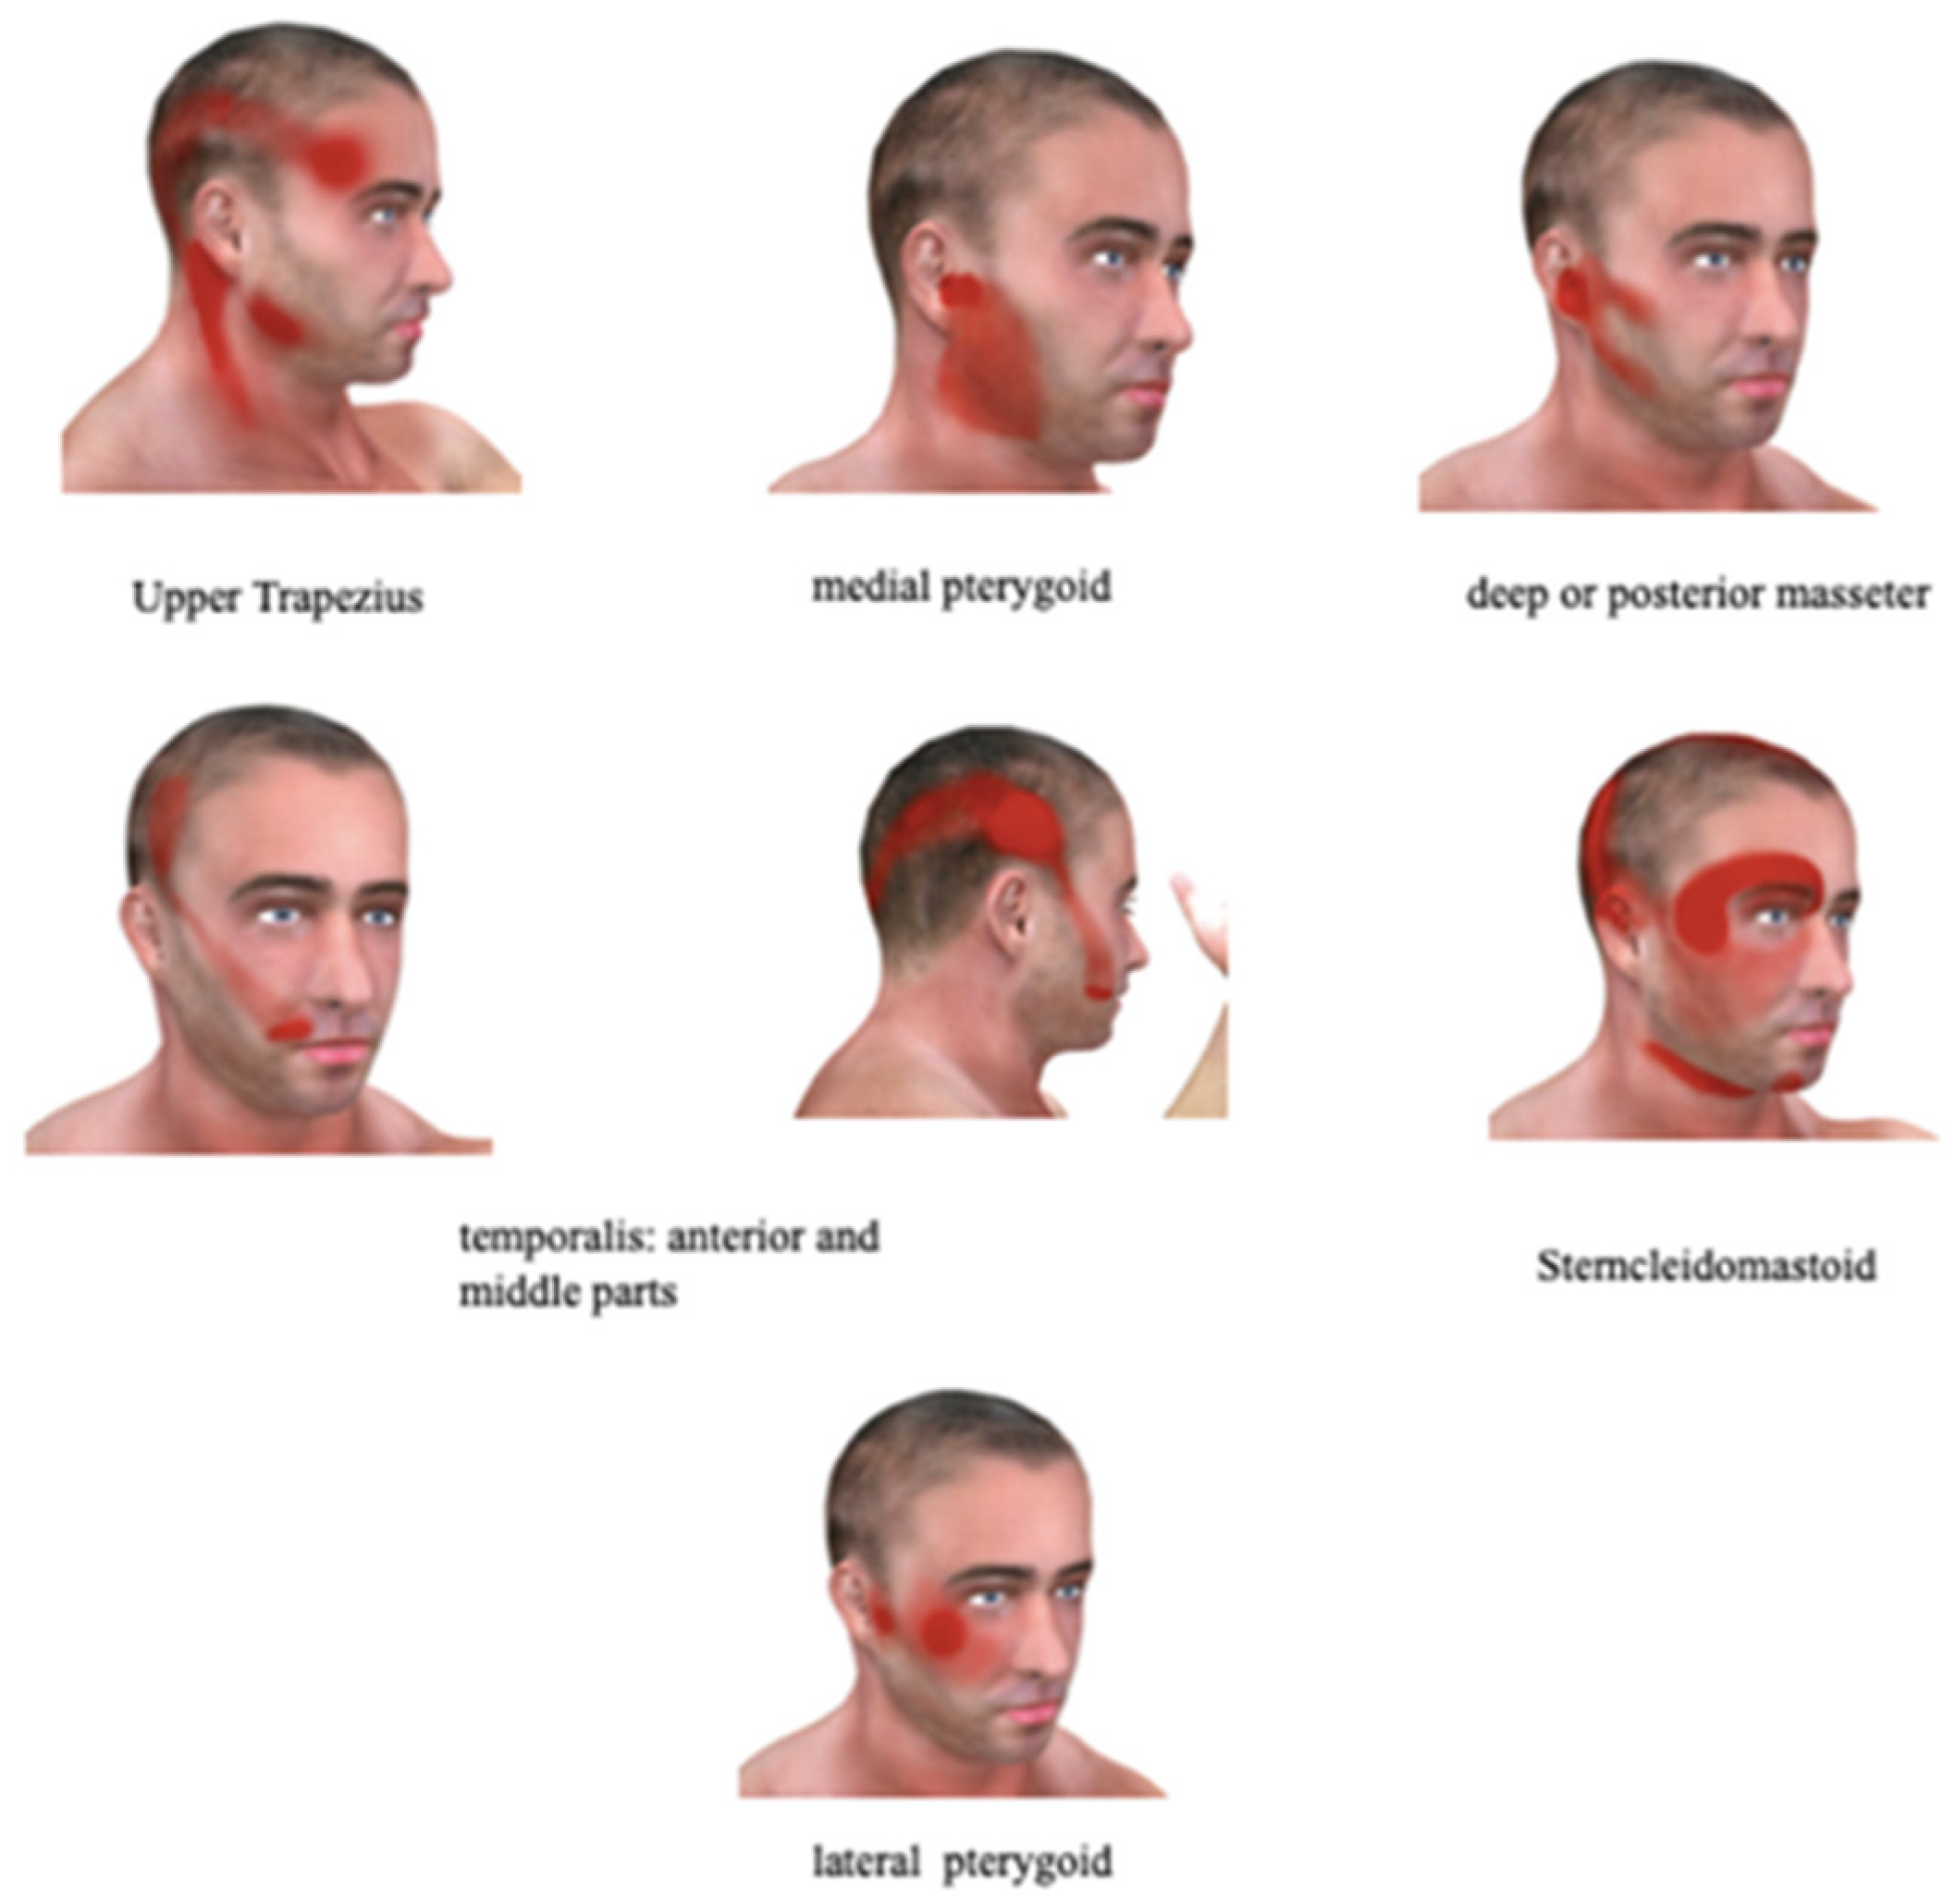 IJERPH | Free Full-Text | Chronic Facial Pain: Trigeminal Neuralgia,  Persistent Idiopathic Facial Pain, and Myofascial Pain Syndrome—An  Evidence-Based Narrative Review and Etiological Hypothesis